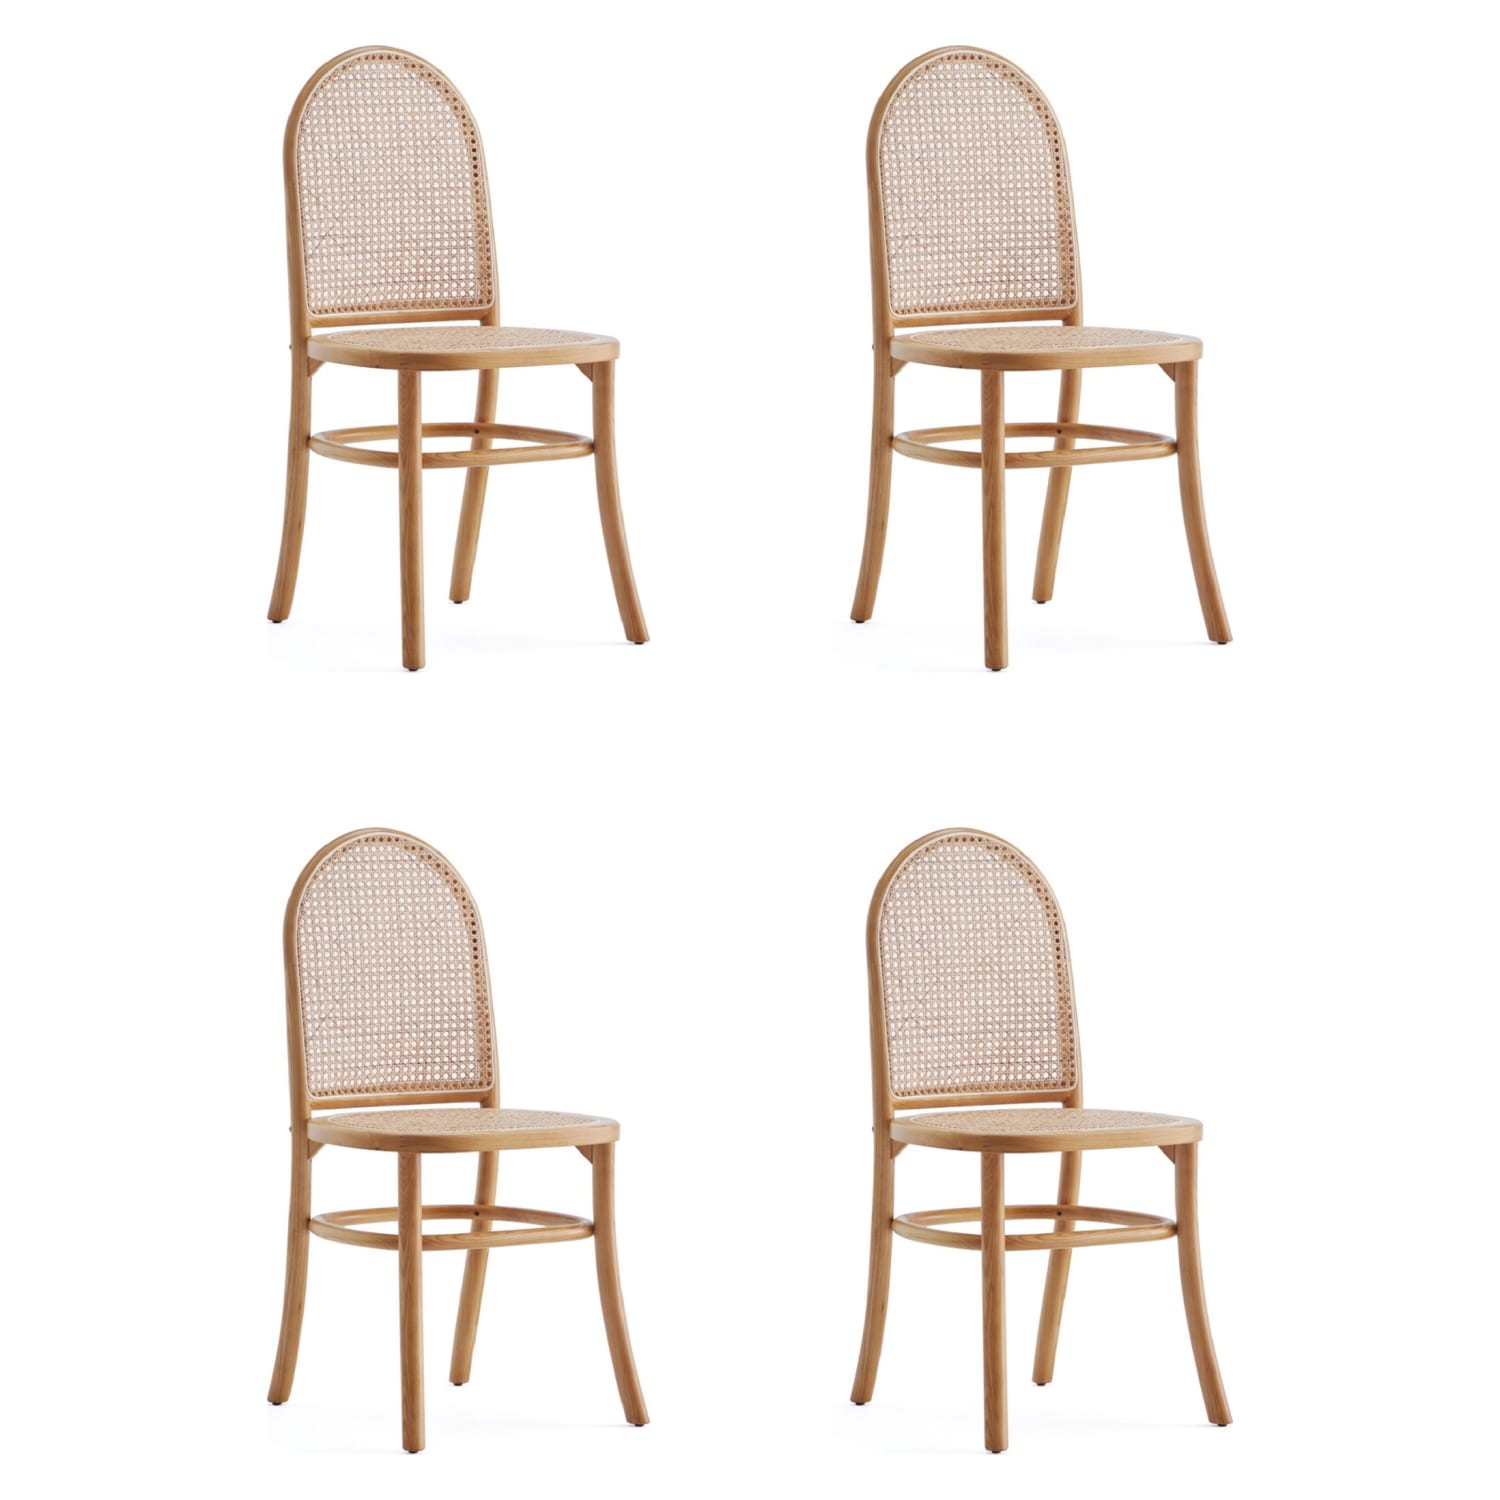 Paragon Dining Chair 2.0 in Nature and Cane - Set of 4